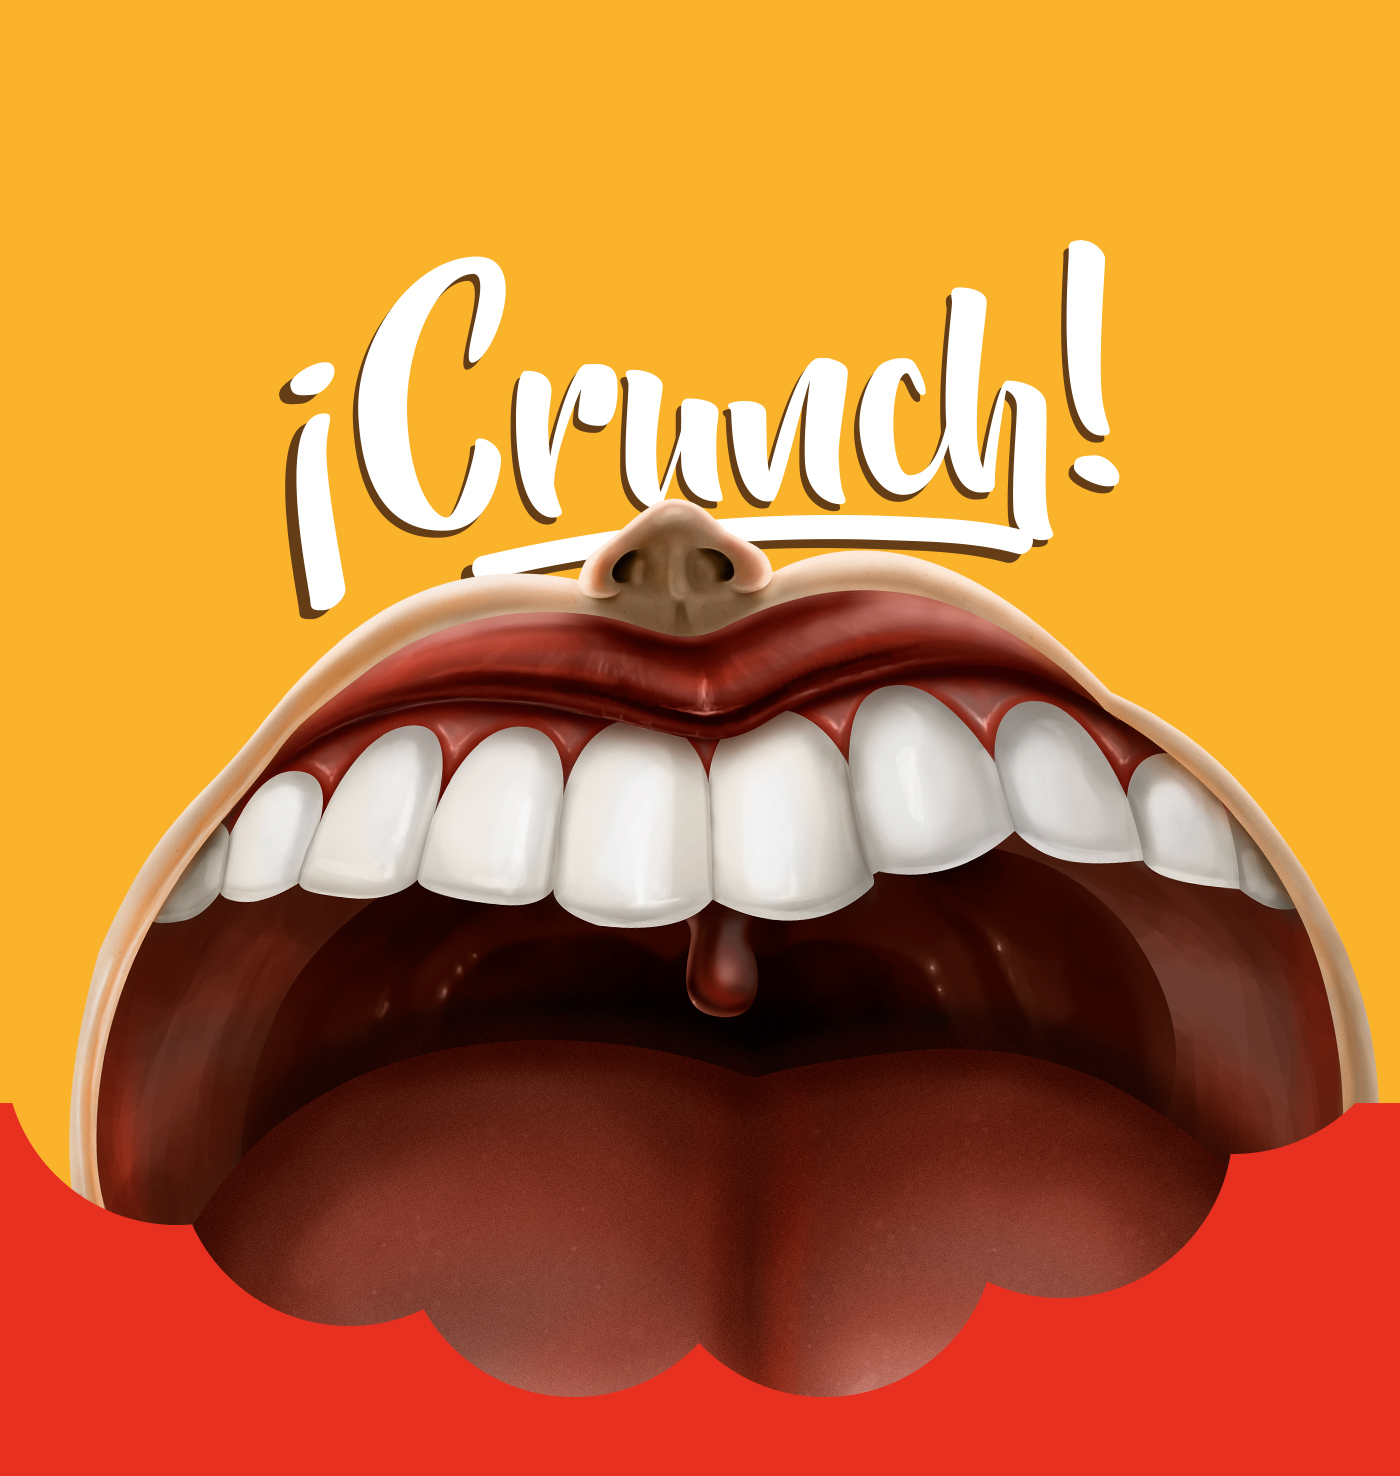 sausage crunch Mouth digital paint bite open mouth lettering Advertising  salchicha packing